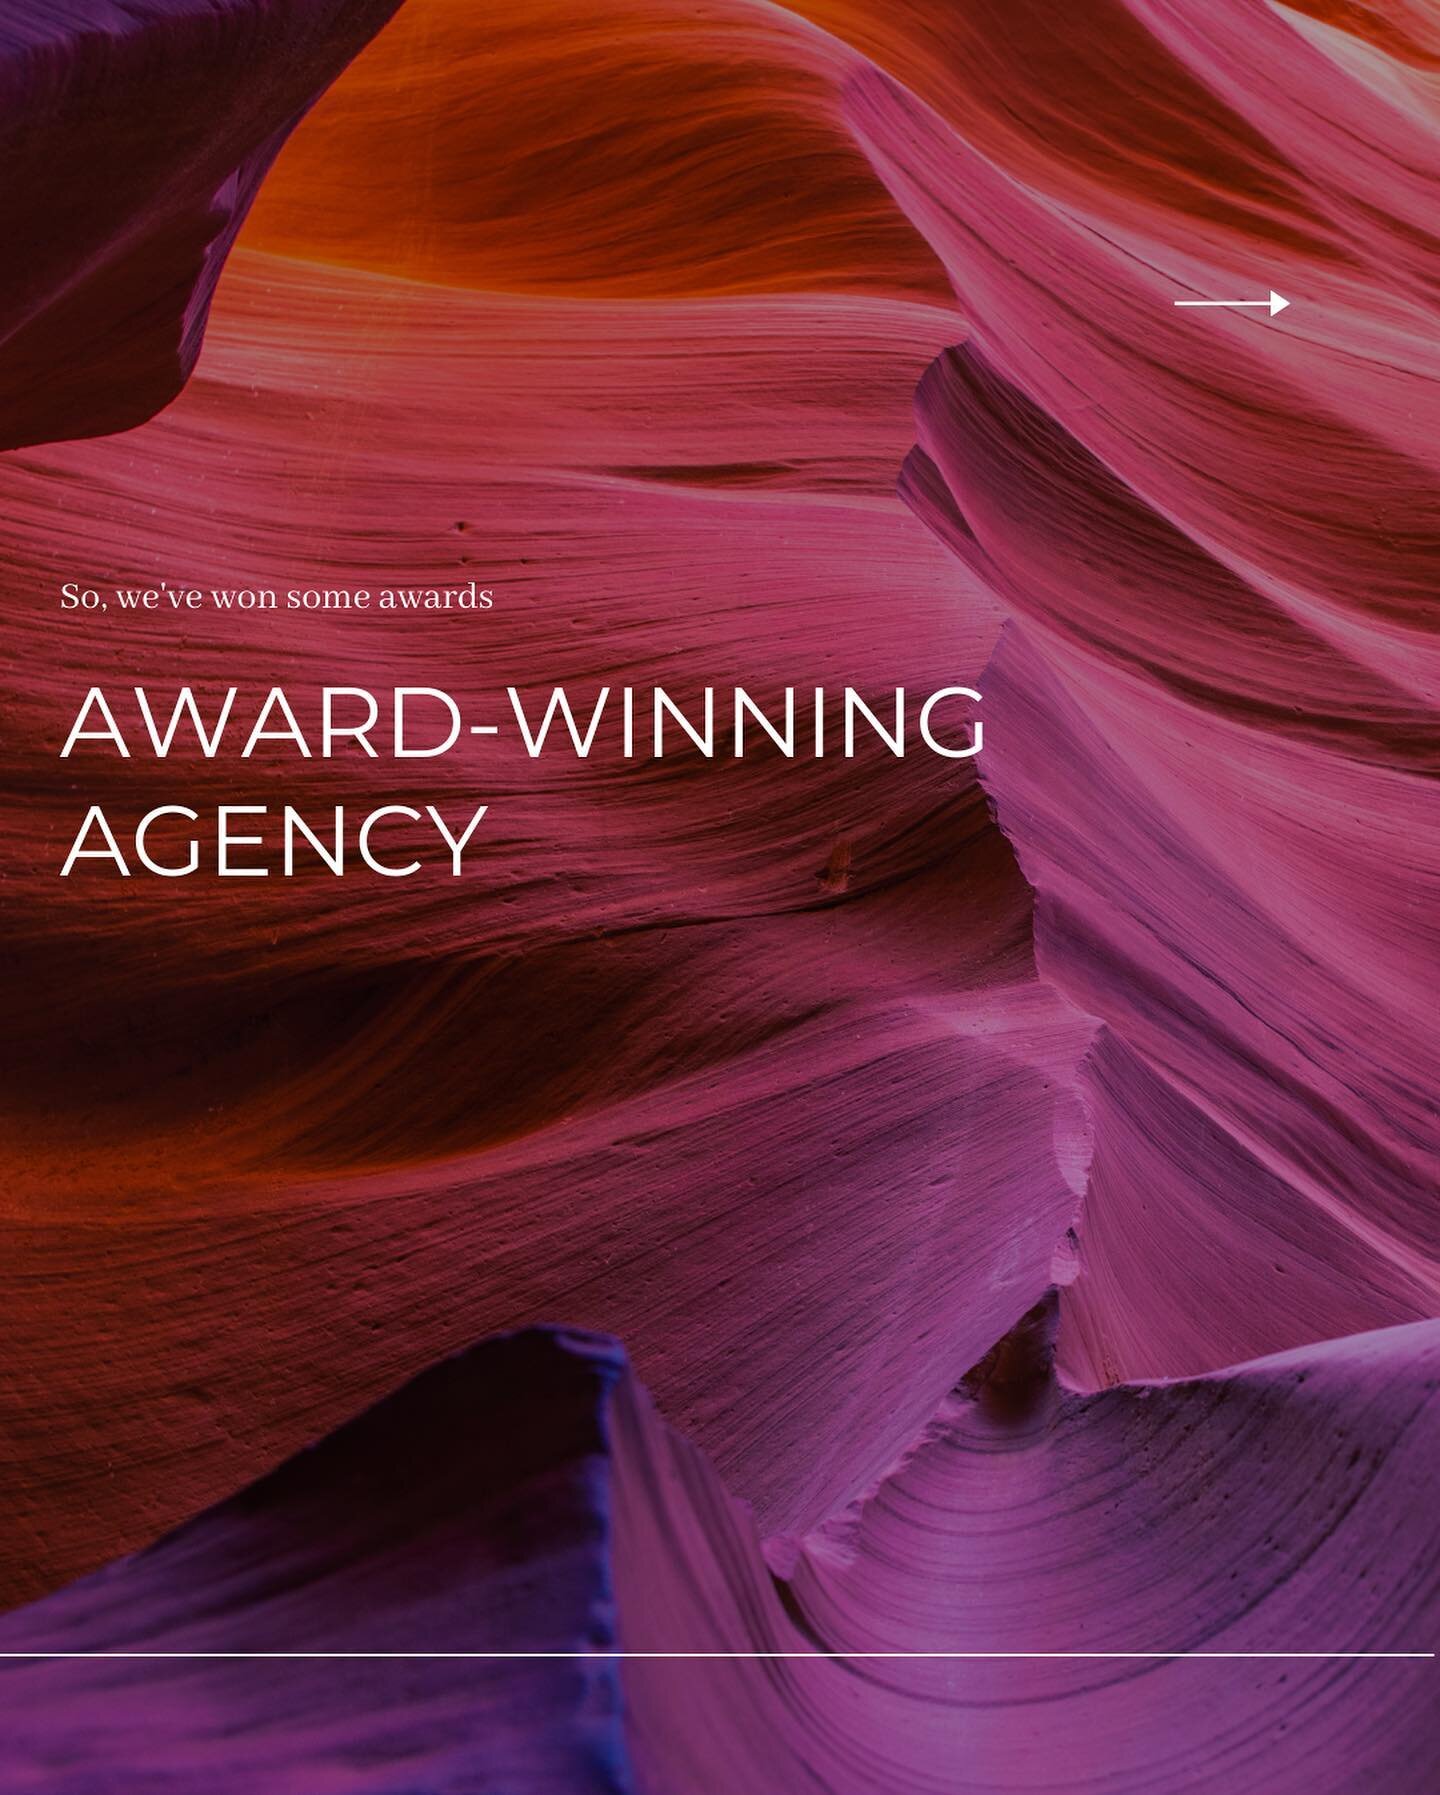 Over the last couple of years, Millennium Communications has won multiple awards, including being recognised as one of Sydney&rsquo;s Top PR Agencies in 2022.

Founder @cassandra.hili has also been awarded and nominated for multiple awards, including